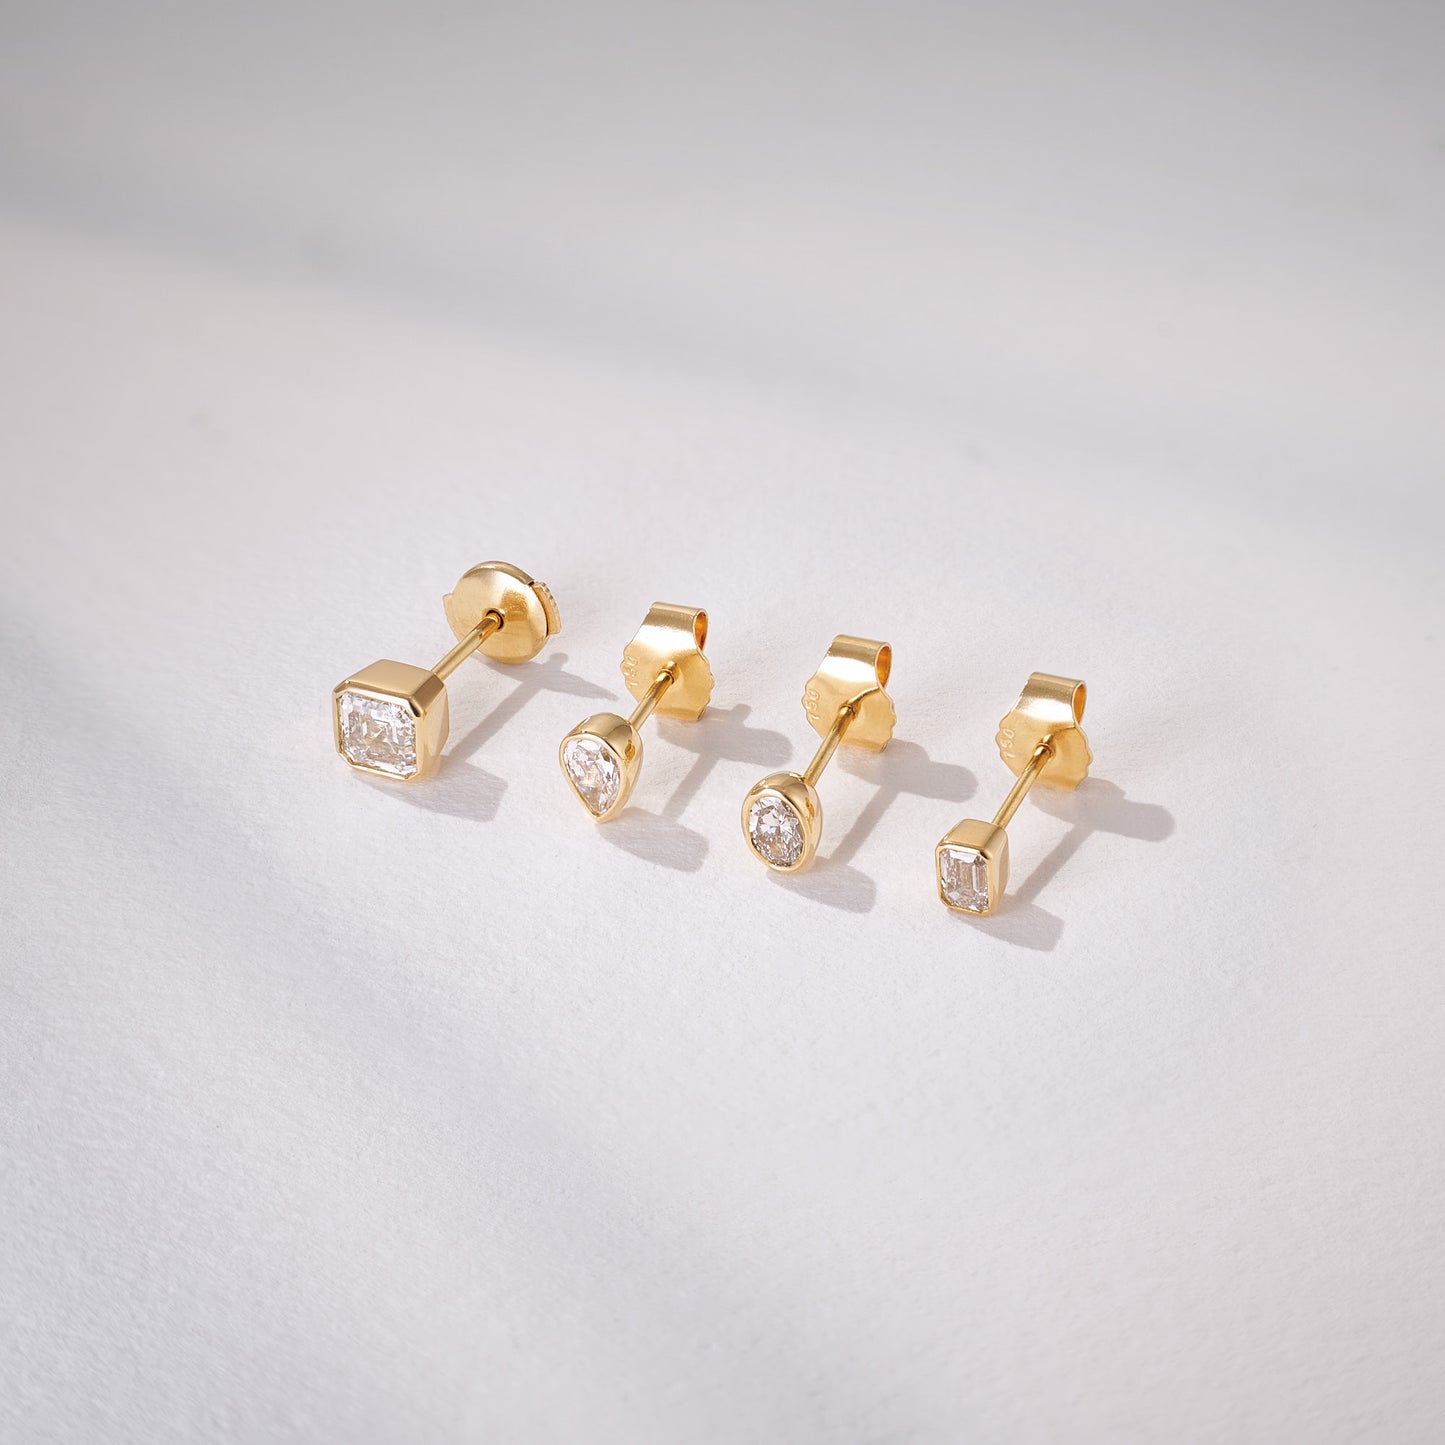 Emerald Cut Modern 0.39ct Diamond Studs in 18ct Recycled Yellow Gold